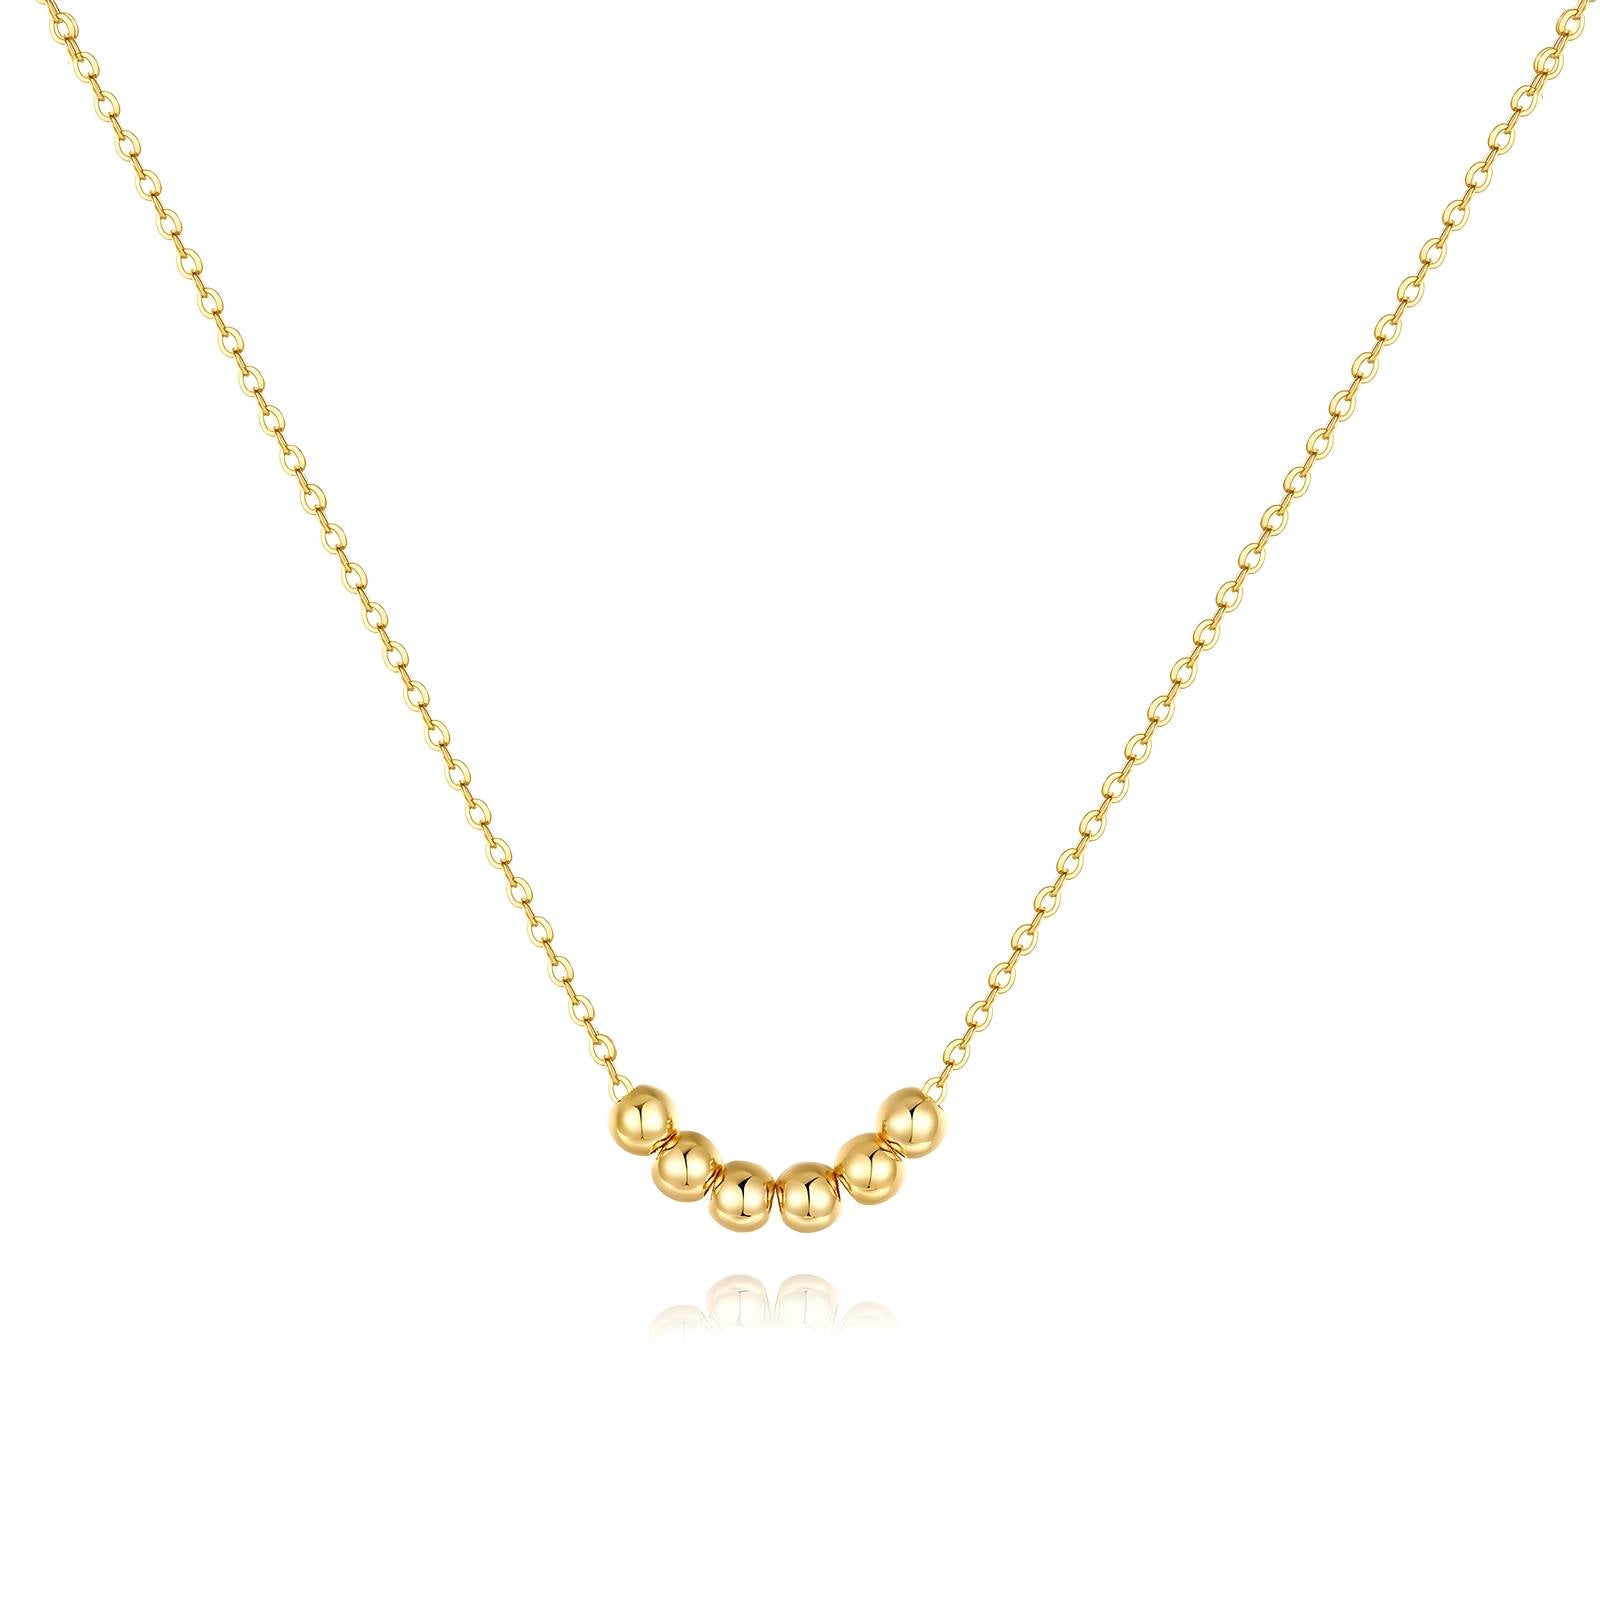 Gold Plated Bead Necklace